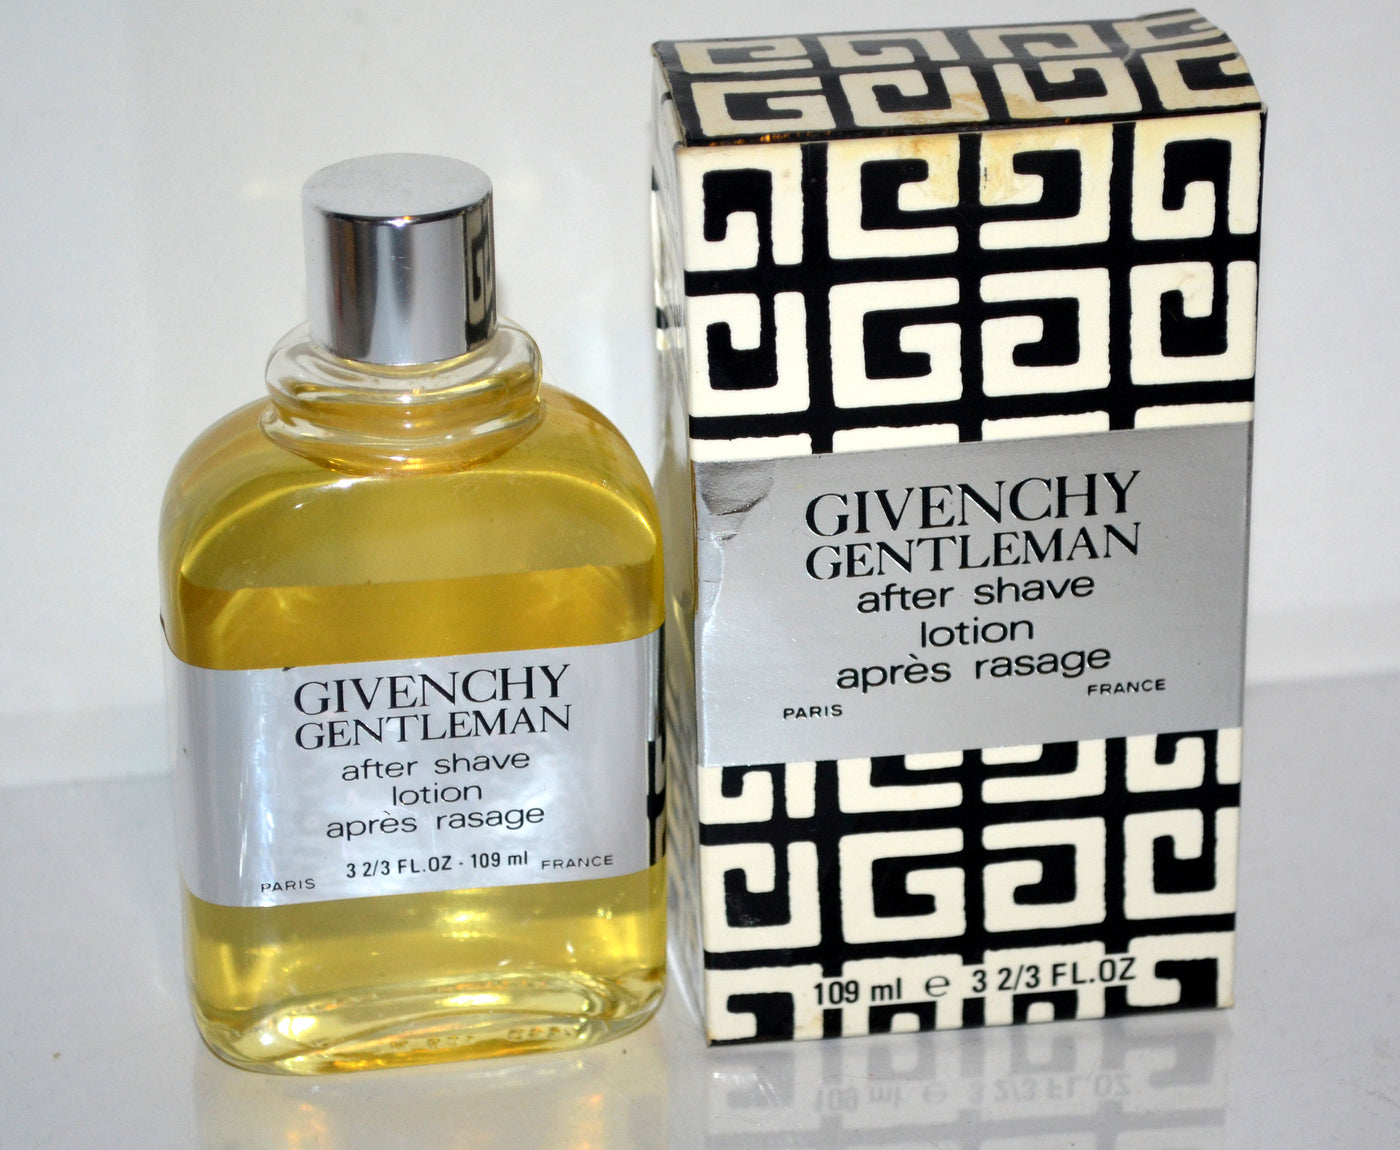  Givenchy Gentleman After Shave